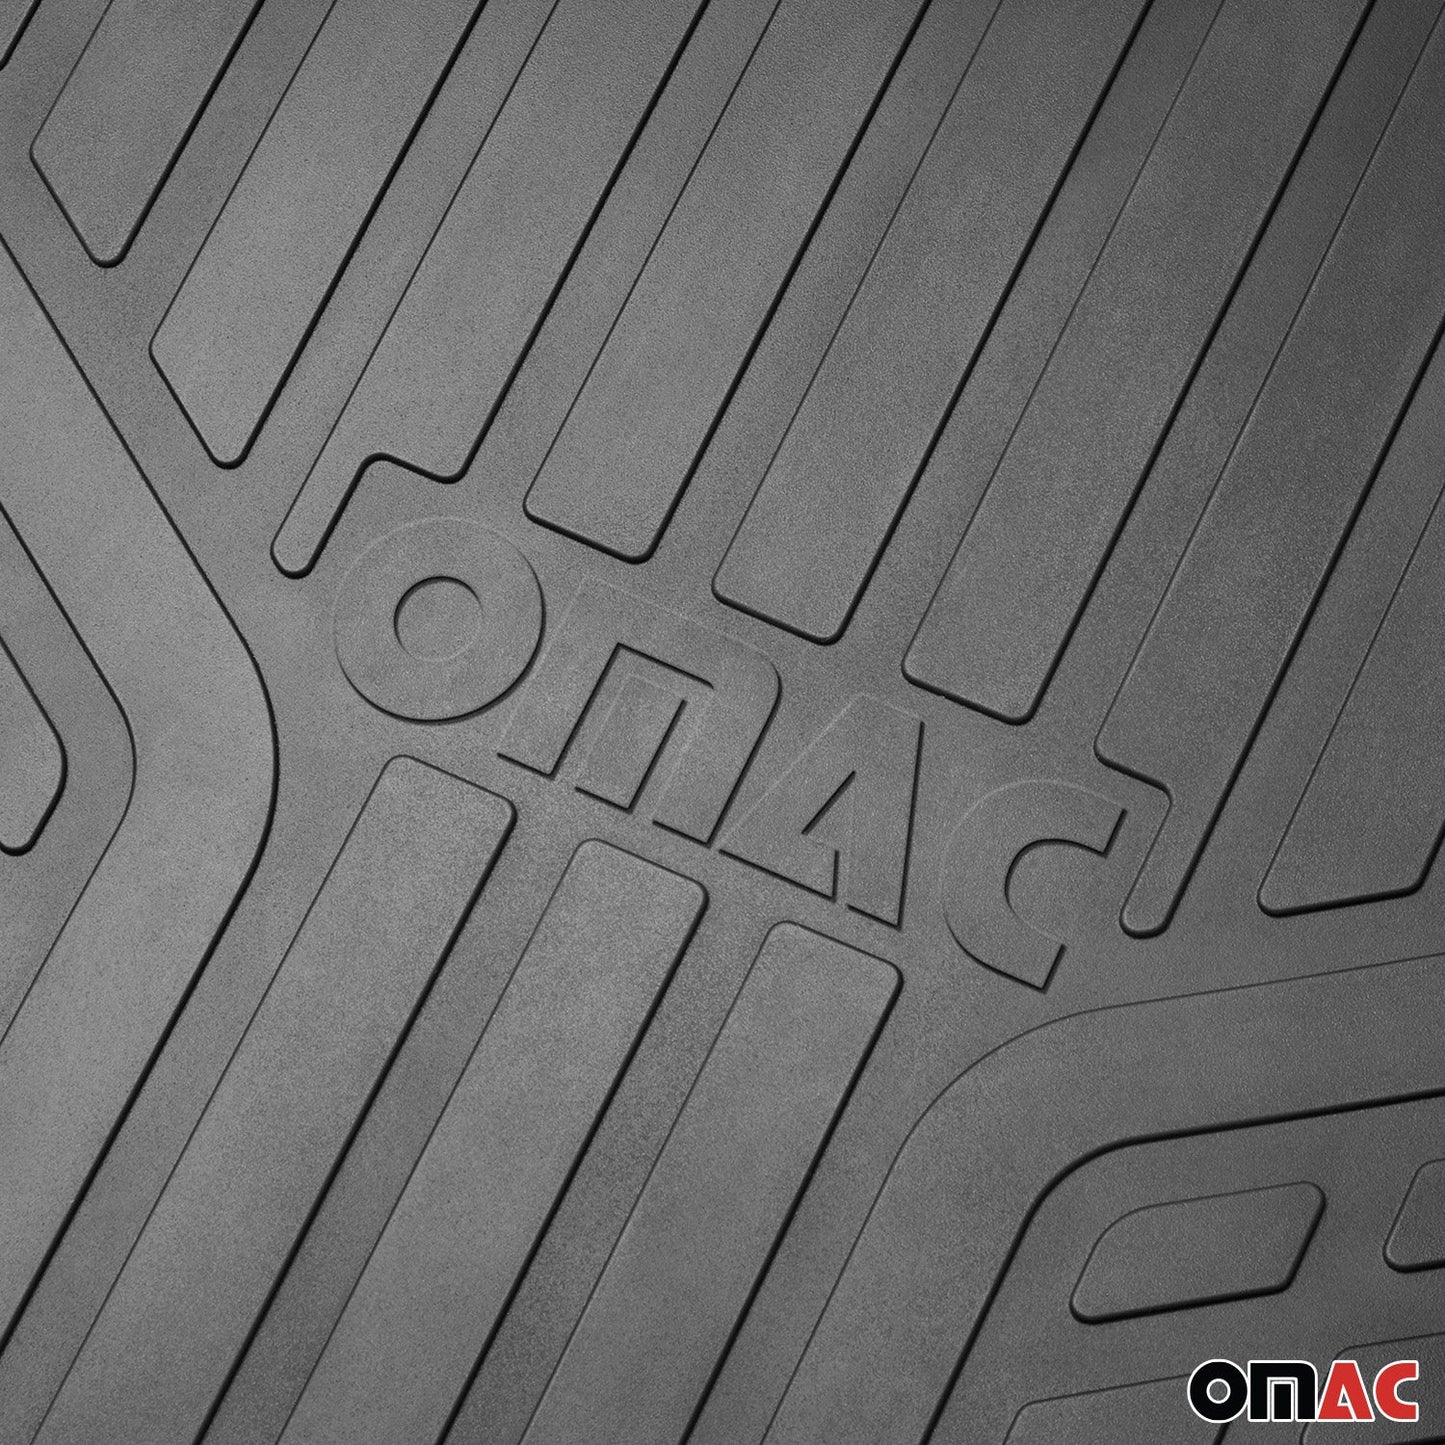 OMAC Trimmable Floor Mats Liner Waterproof for Mercedes GLA Class Rubber Black 4Pcs A058346